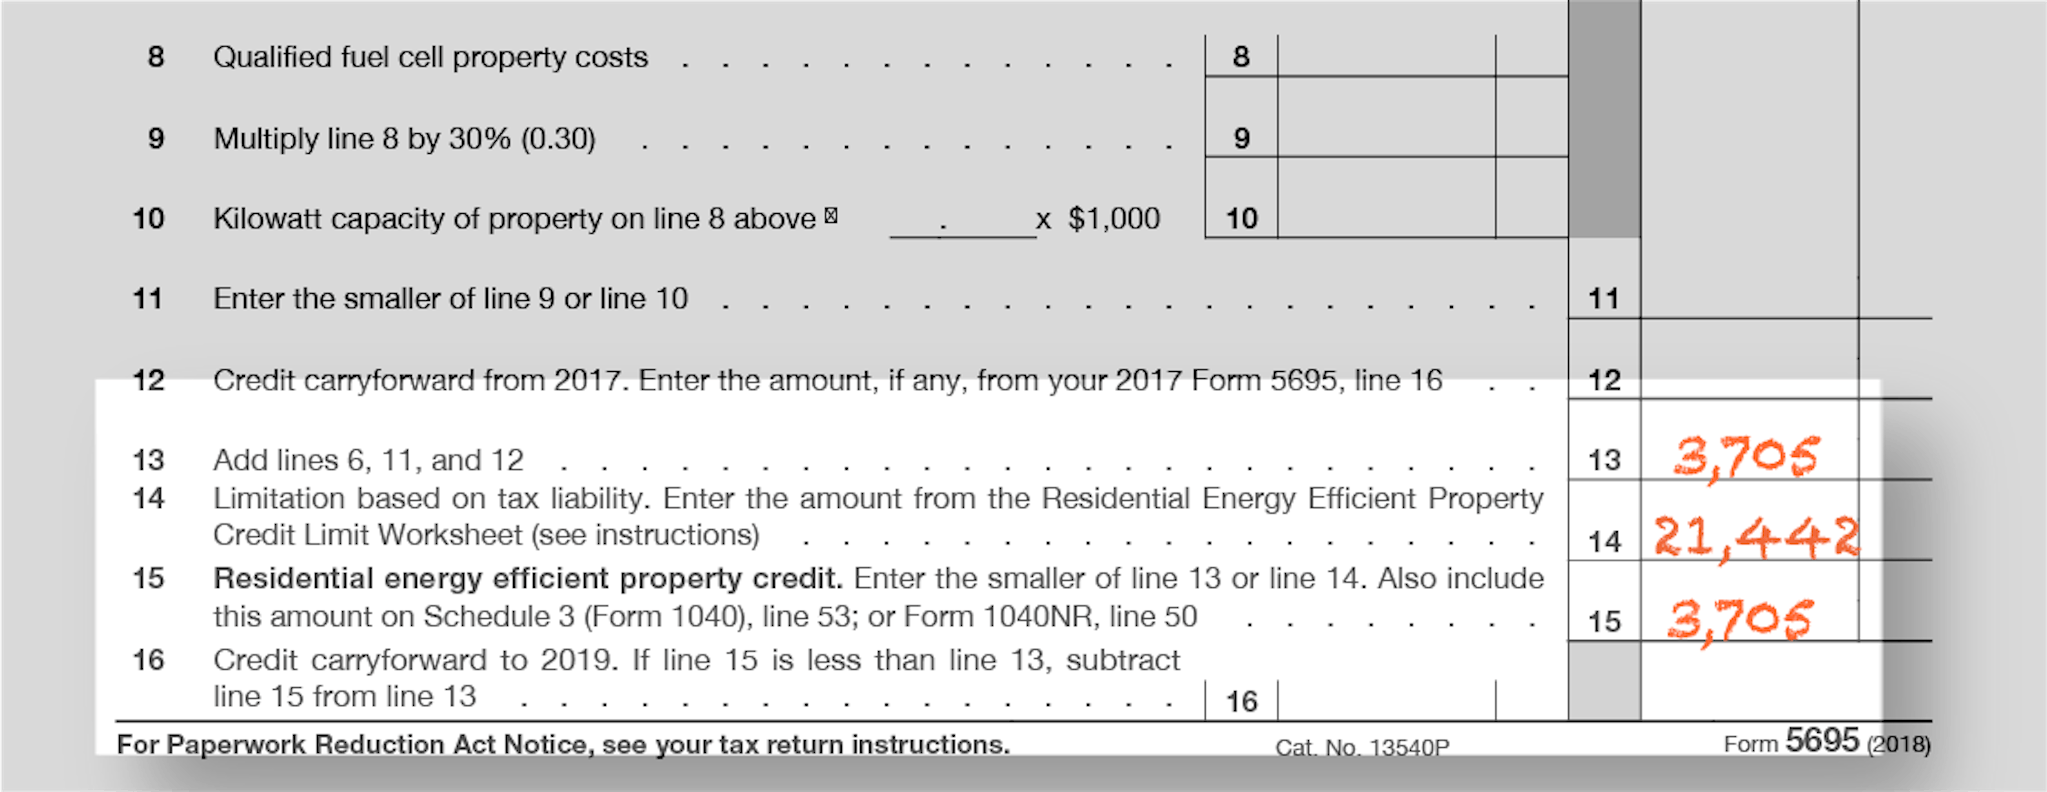 How to File IRS Form 5695 To Claim Your Renewable Energy Credits